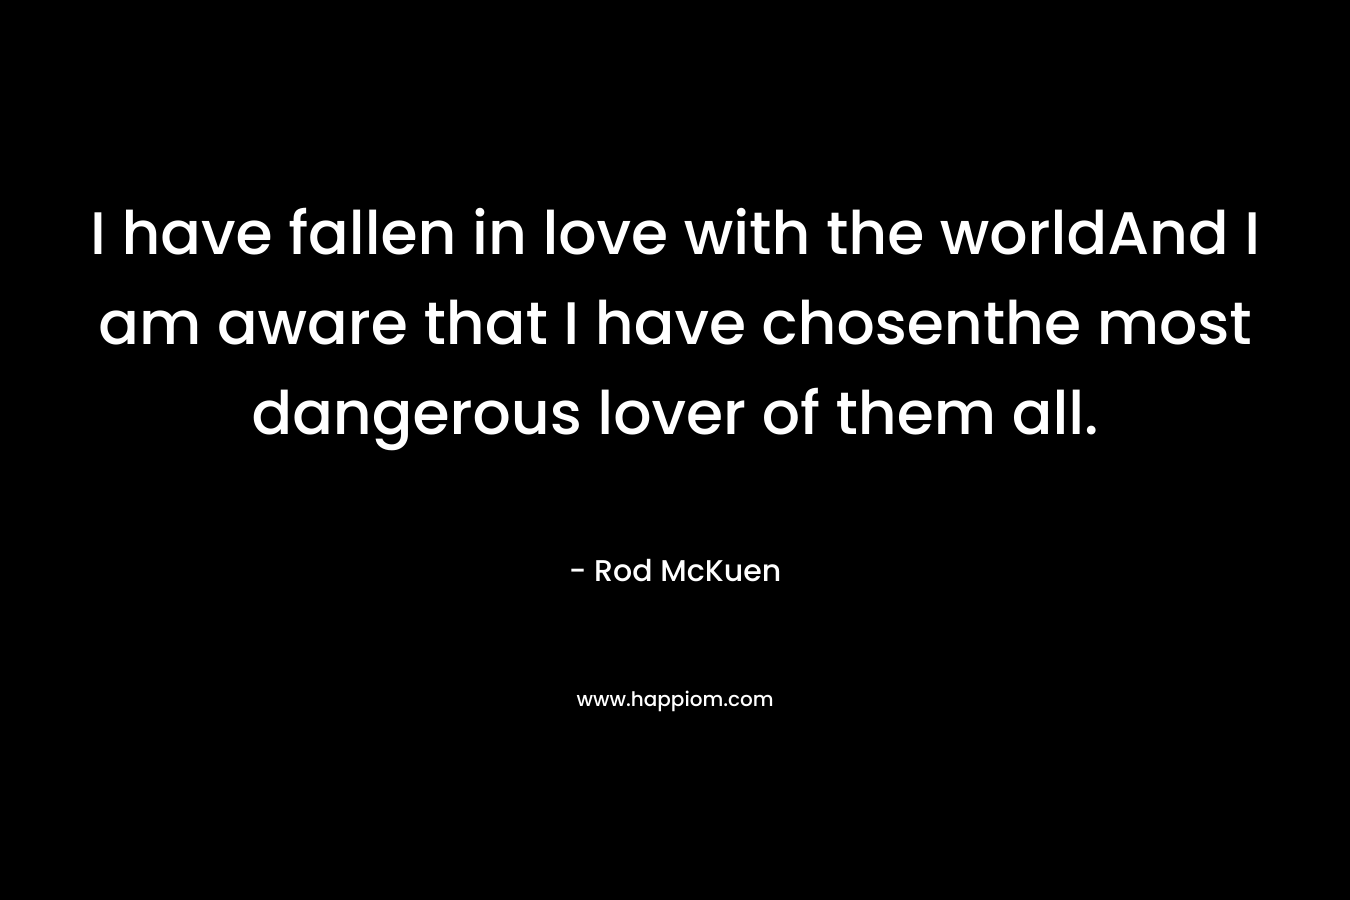 I have fallen in love with the worldAnd I am aware that I have chosenthe most dangerous lover of them all.